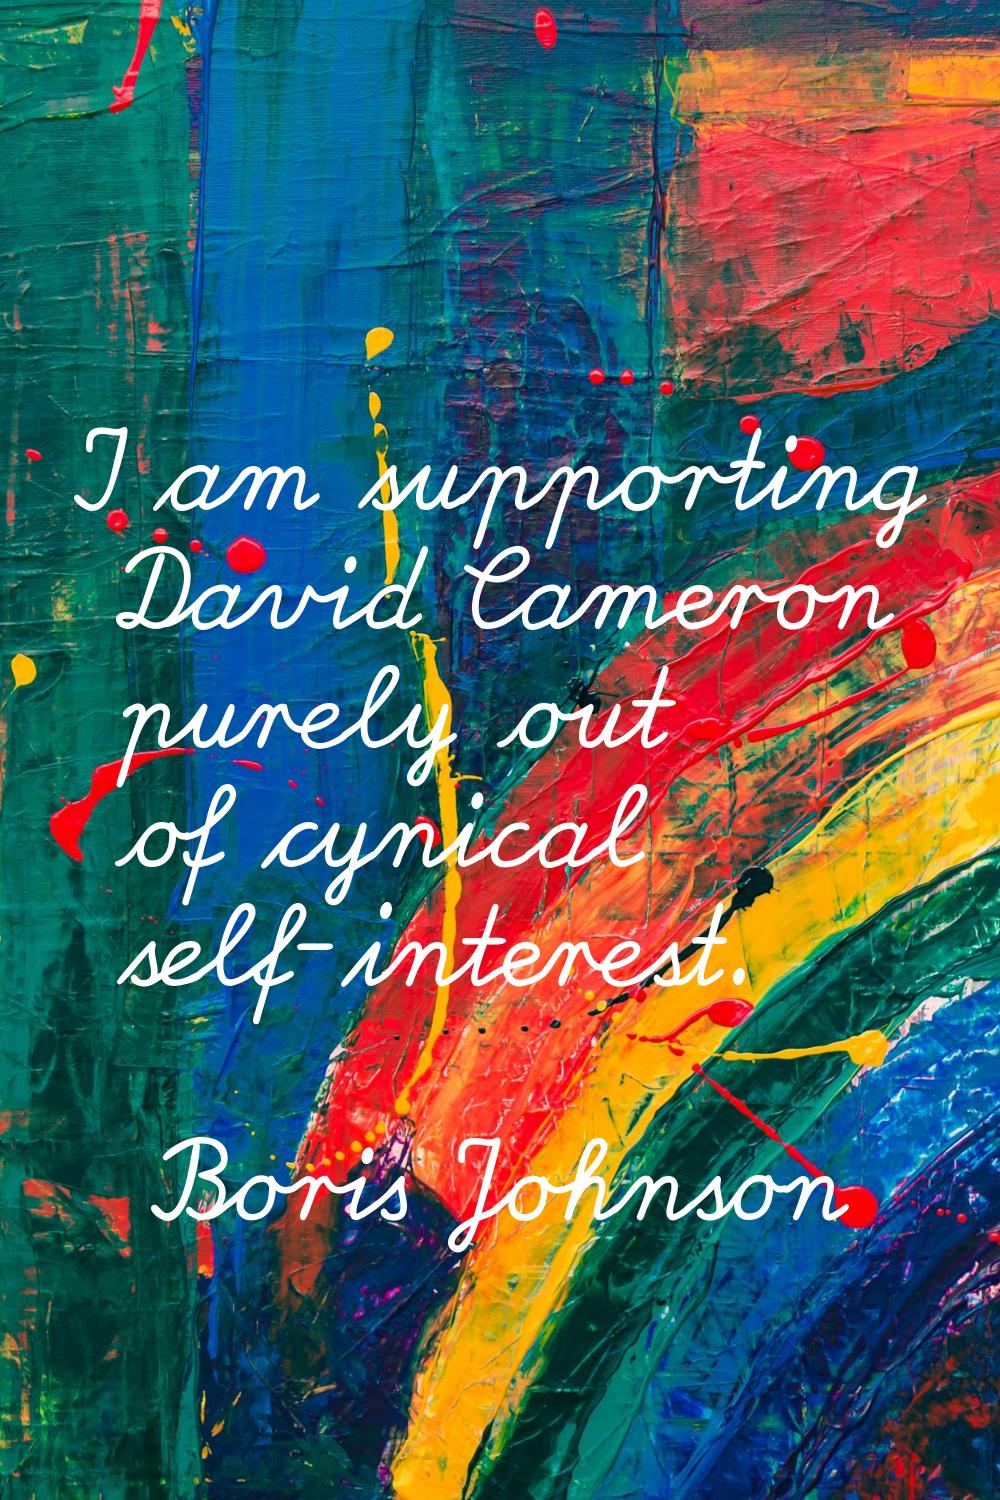 I am supporting David Cameron purely out of cynical self-interest.